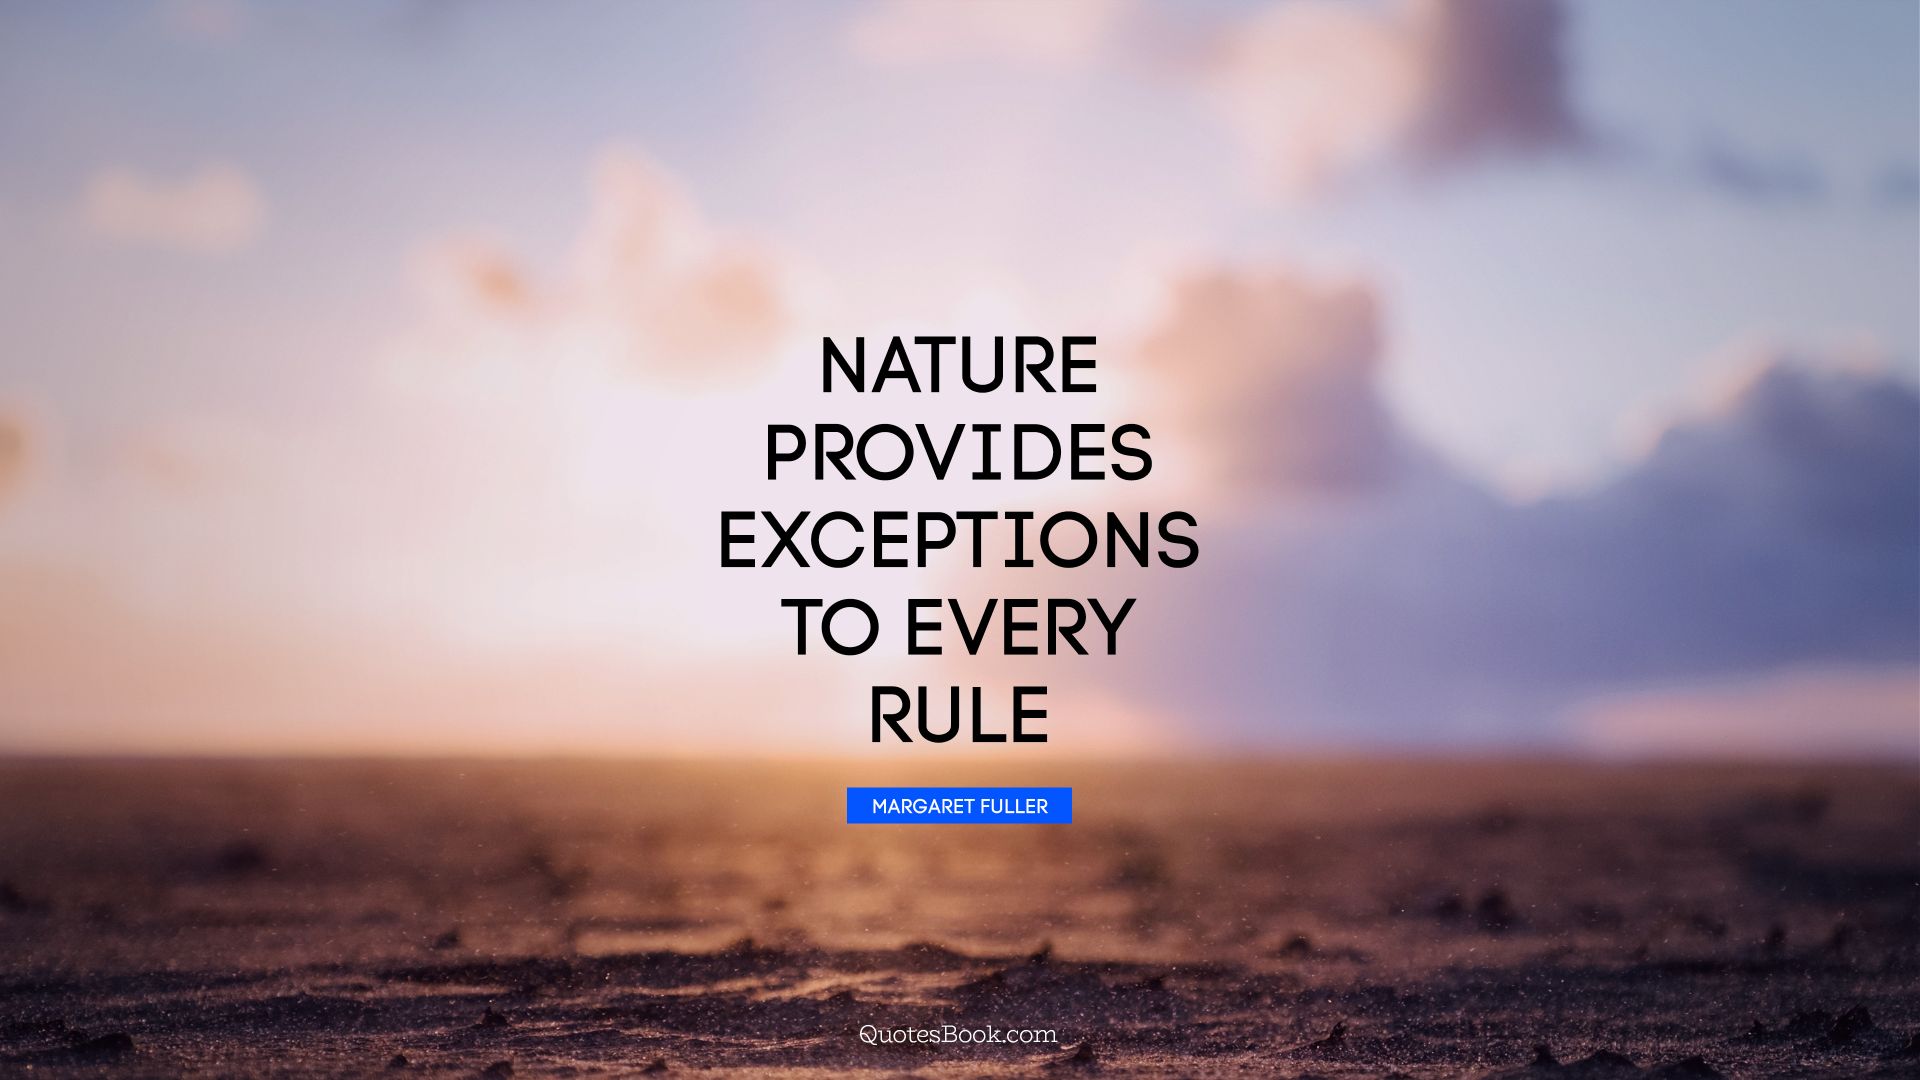 Nature provides exceptions to every rule. - Quote by Margaret Fuller